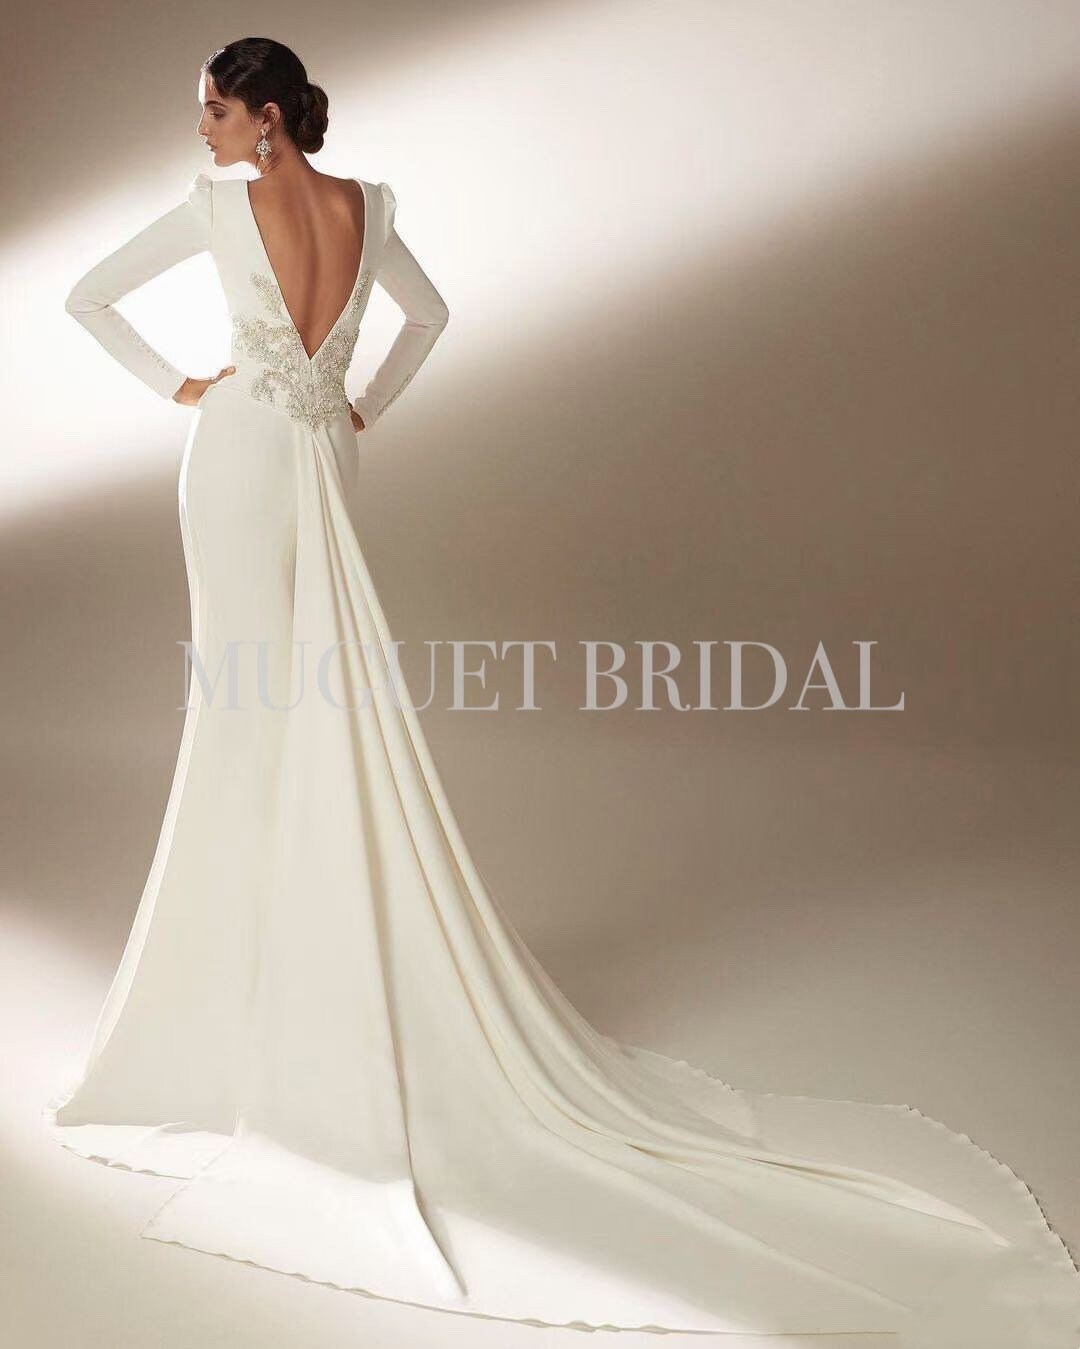 LONG-SLEEVE FIT-AND-FLARE WEDDING DRESS WITH DEFINED BUSTLINE